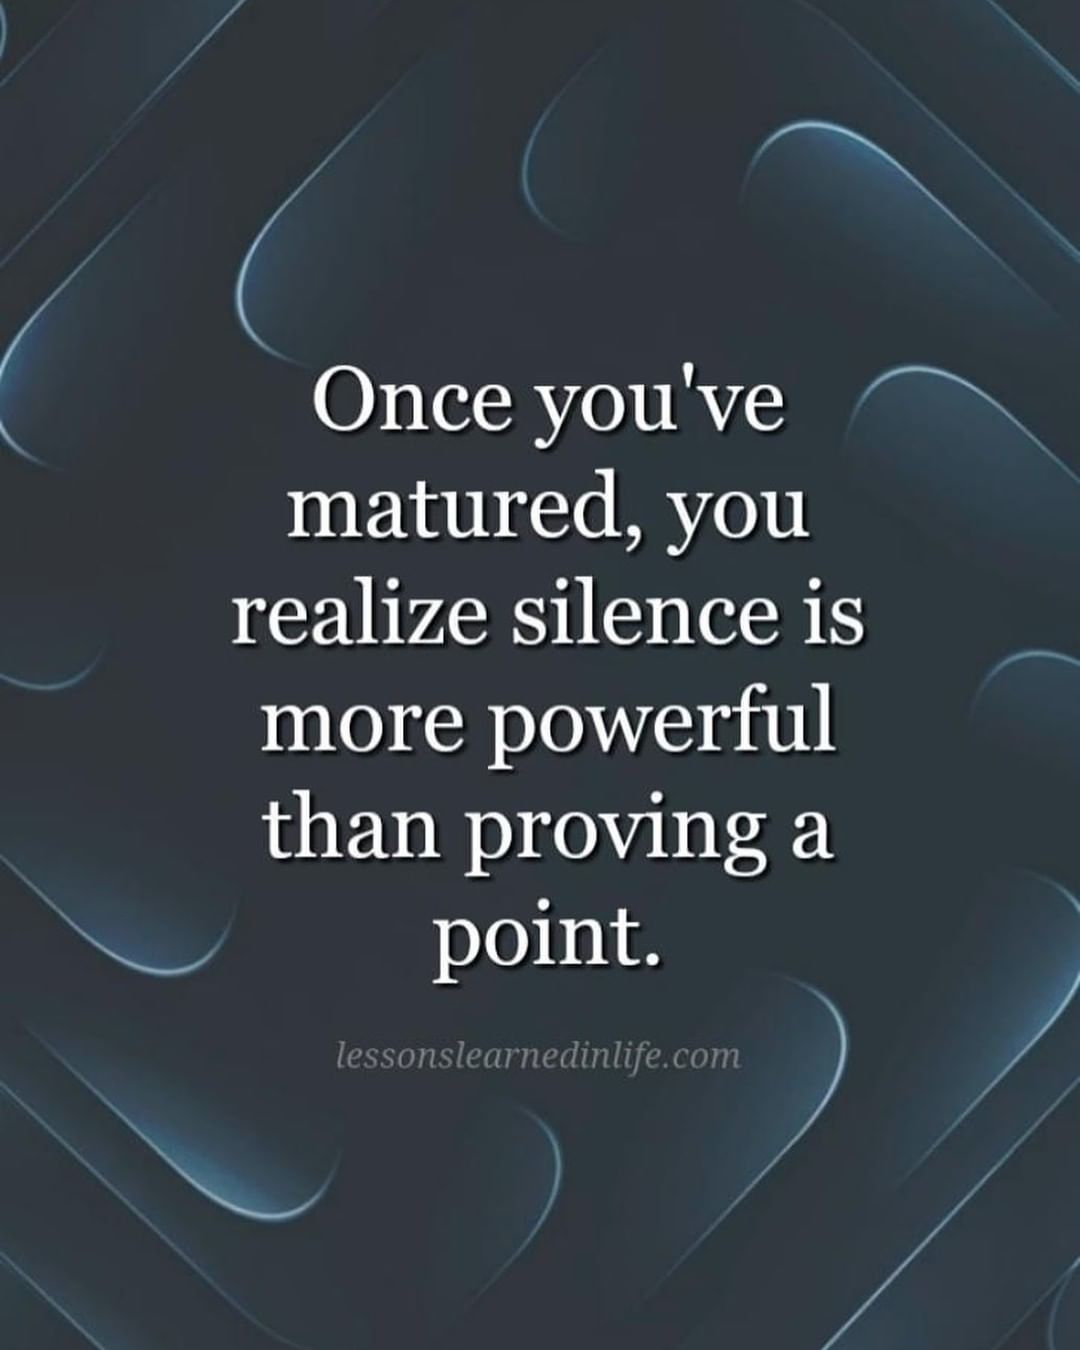 Once you've matured, you realize silence is more powerful than proving a point.